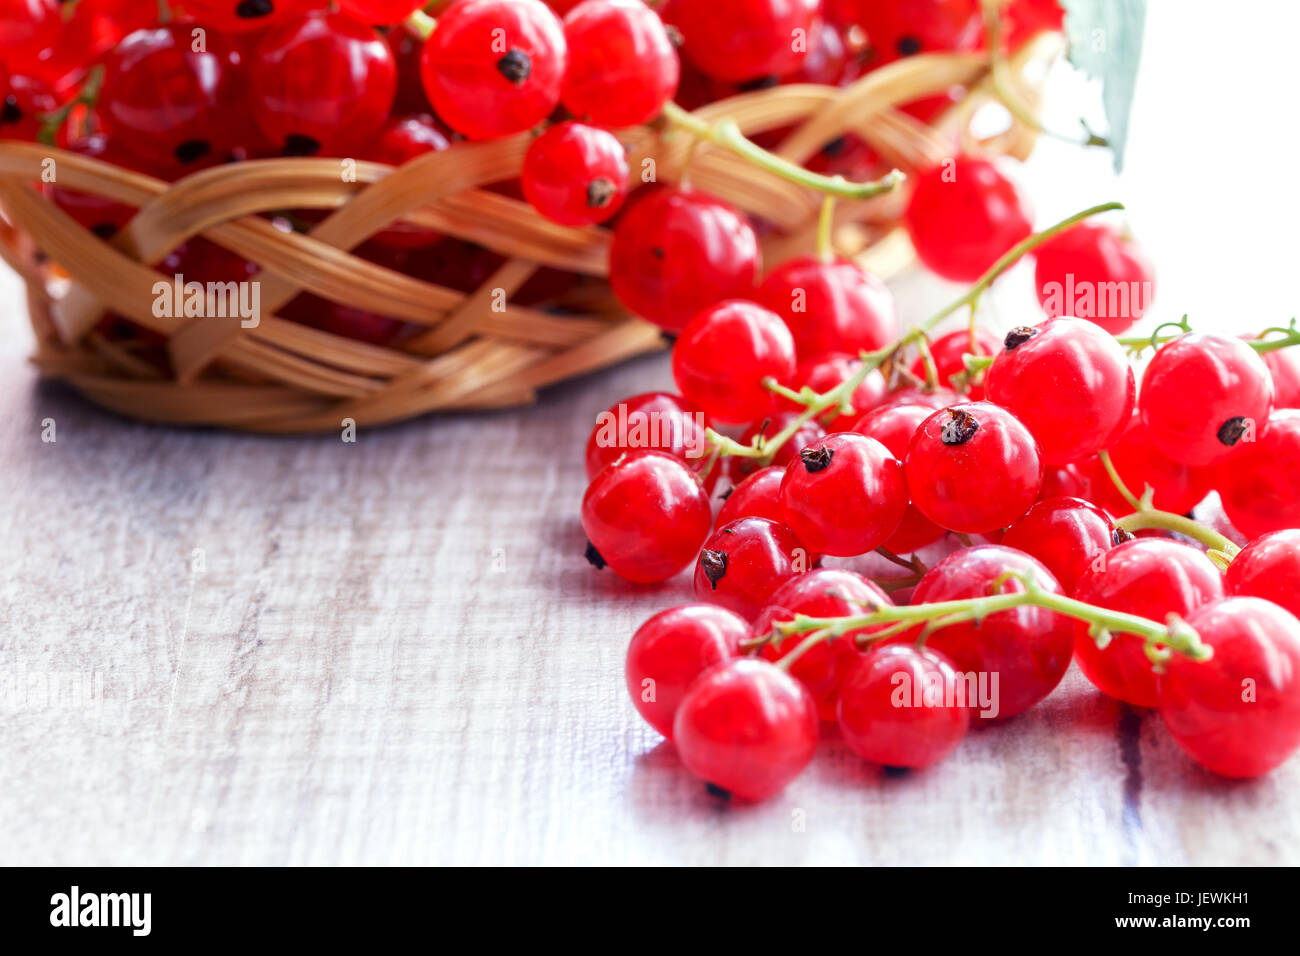 Fruits of red currants on a light background. Close-up Stock Photo